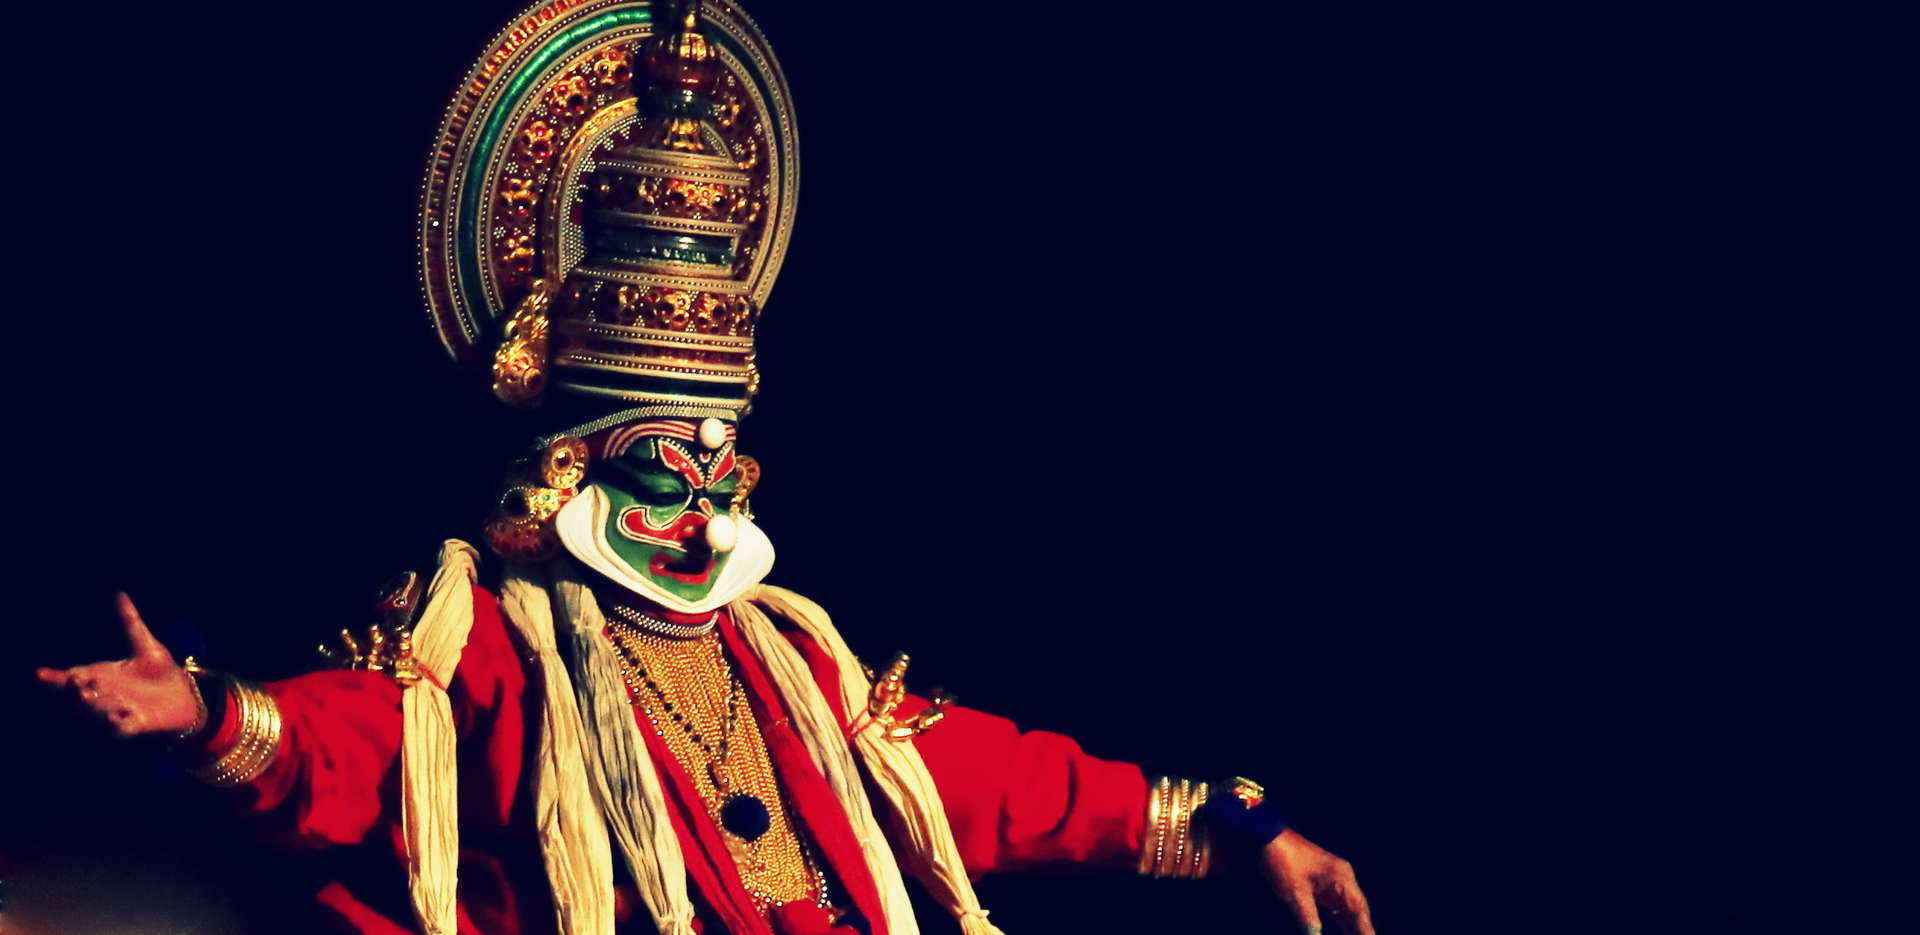 5 Must Buy Souvenirs of Kerala During Family Vacation